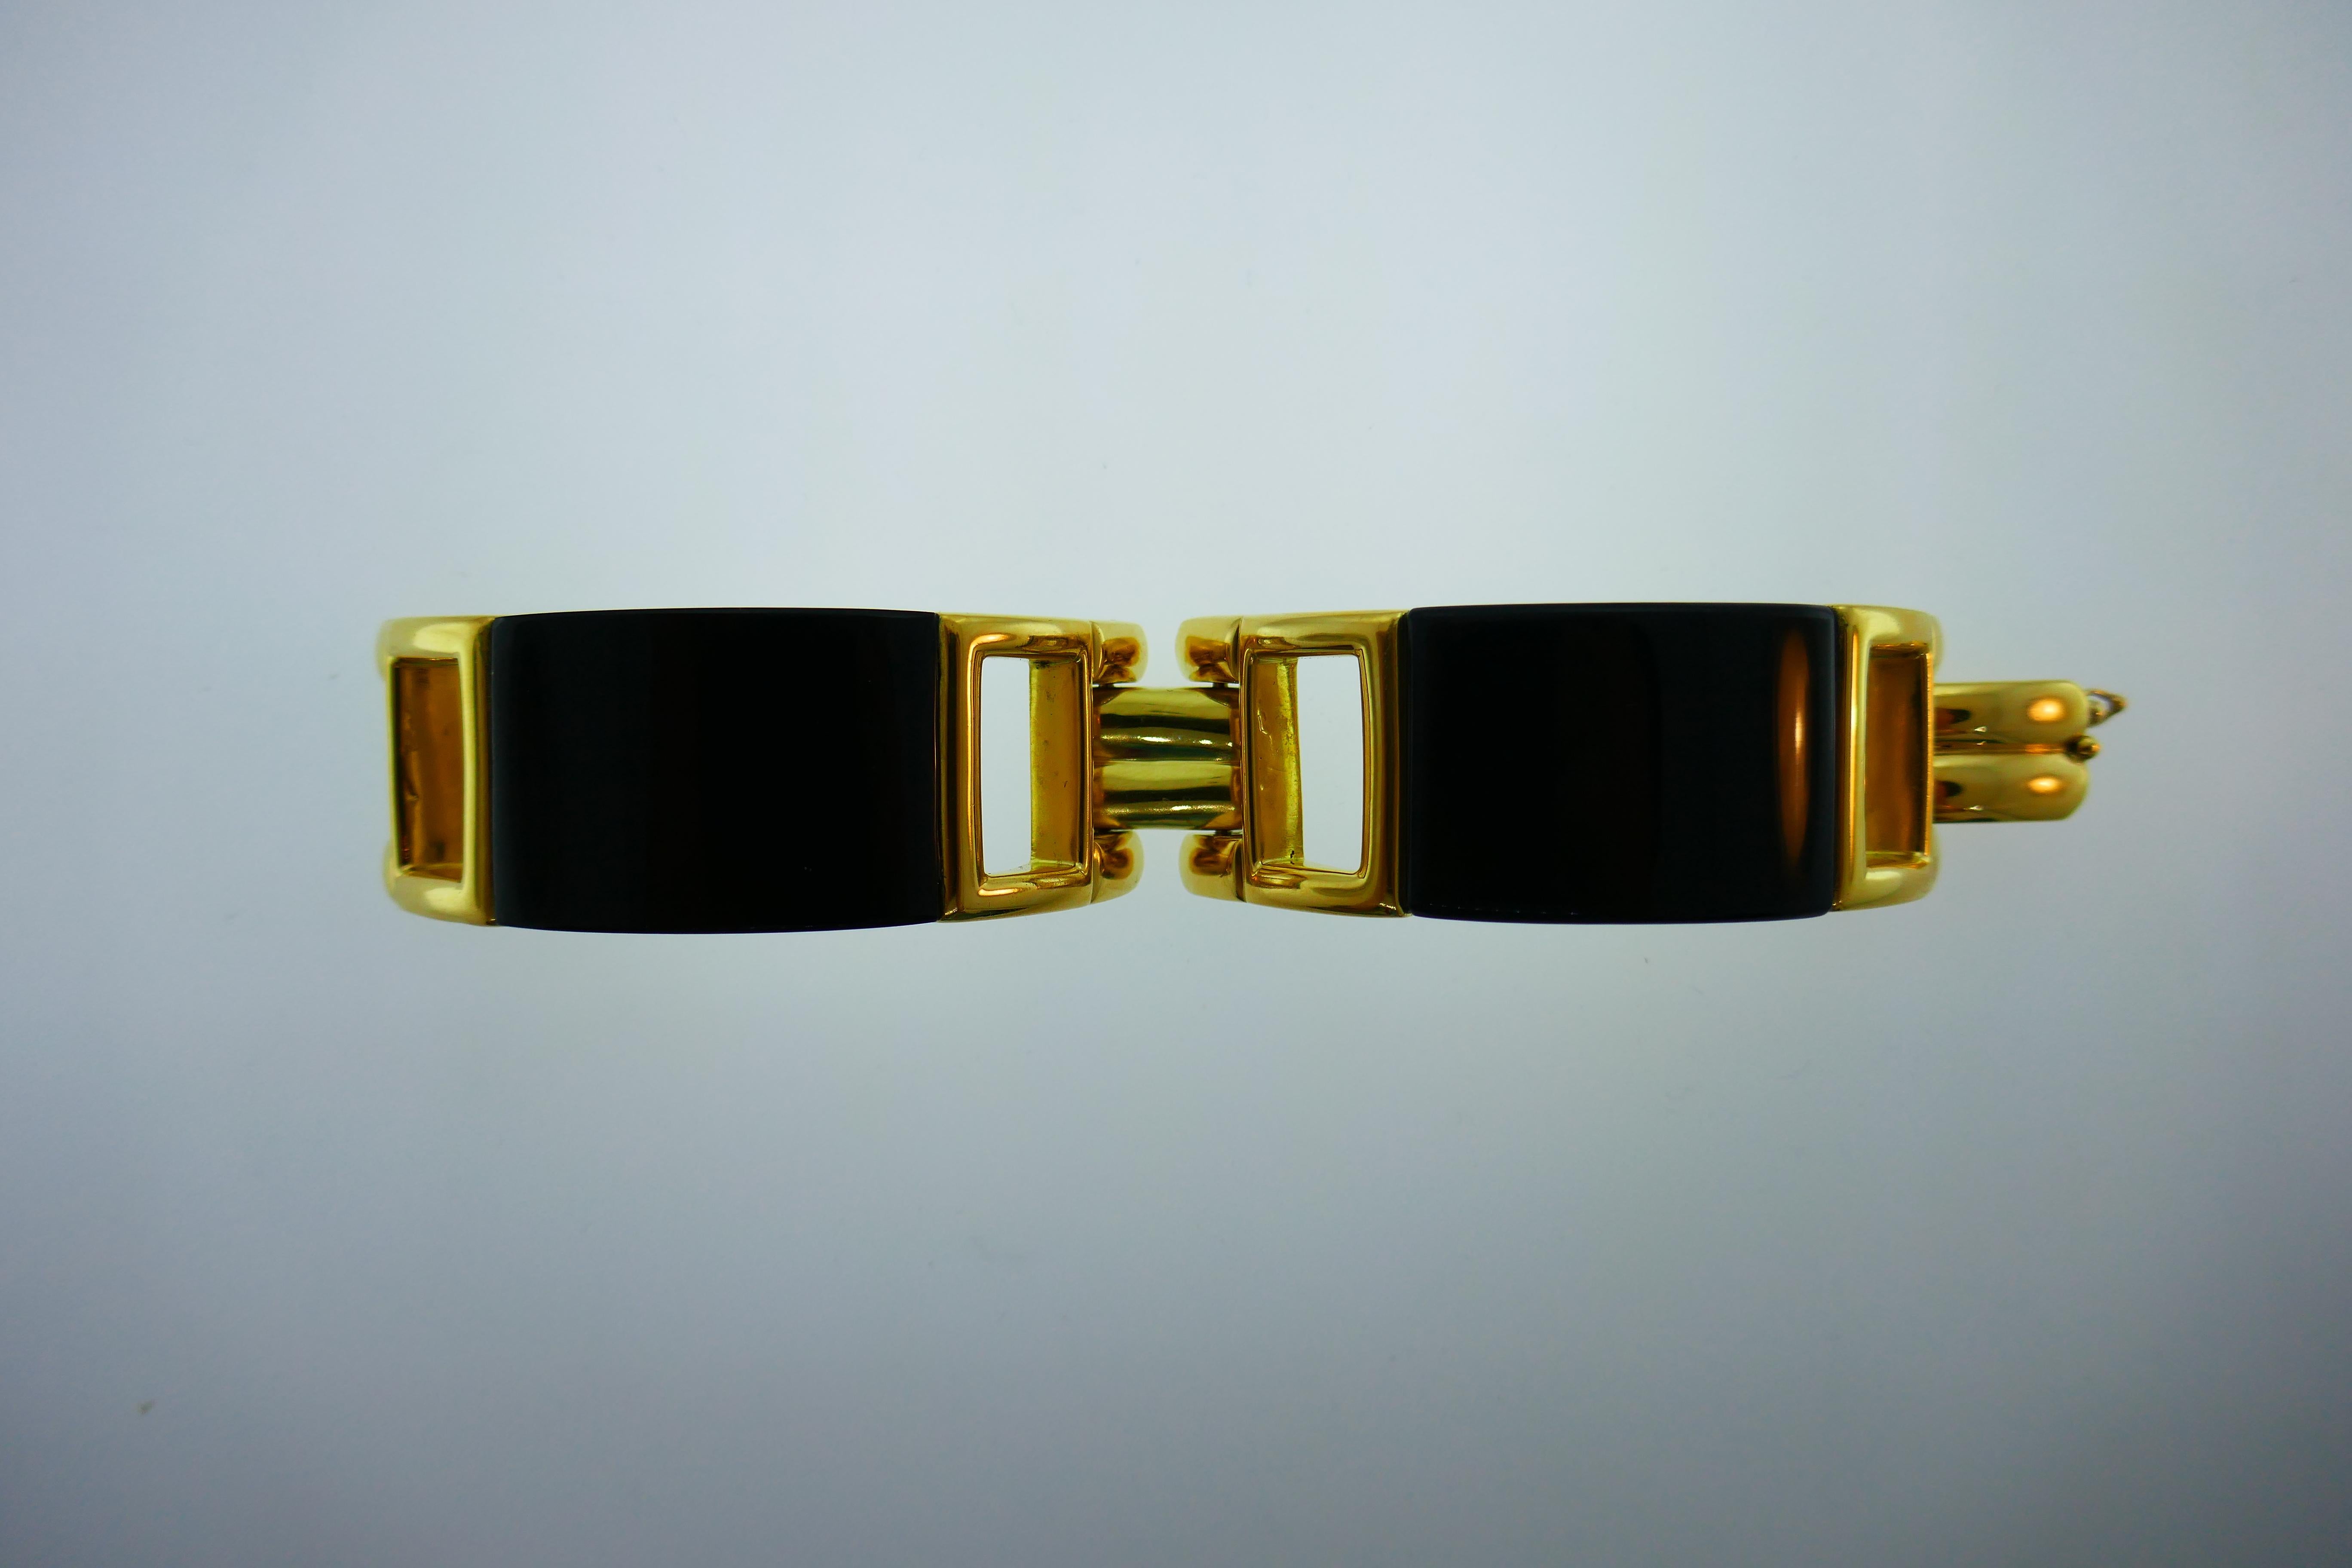 Cartier Aldo Cipullo 18k Yellow Gold & Onyx Bracelet Circa 1970s





Here is your chance to purchase a beautiful and highly collectible designer bracelet.  Truly a great piece at a great price! 



Weight: 96.1 grams



Condition: